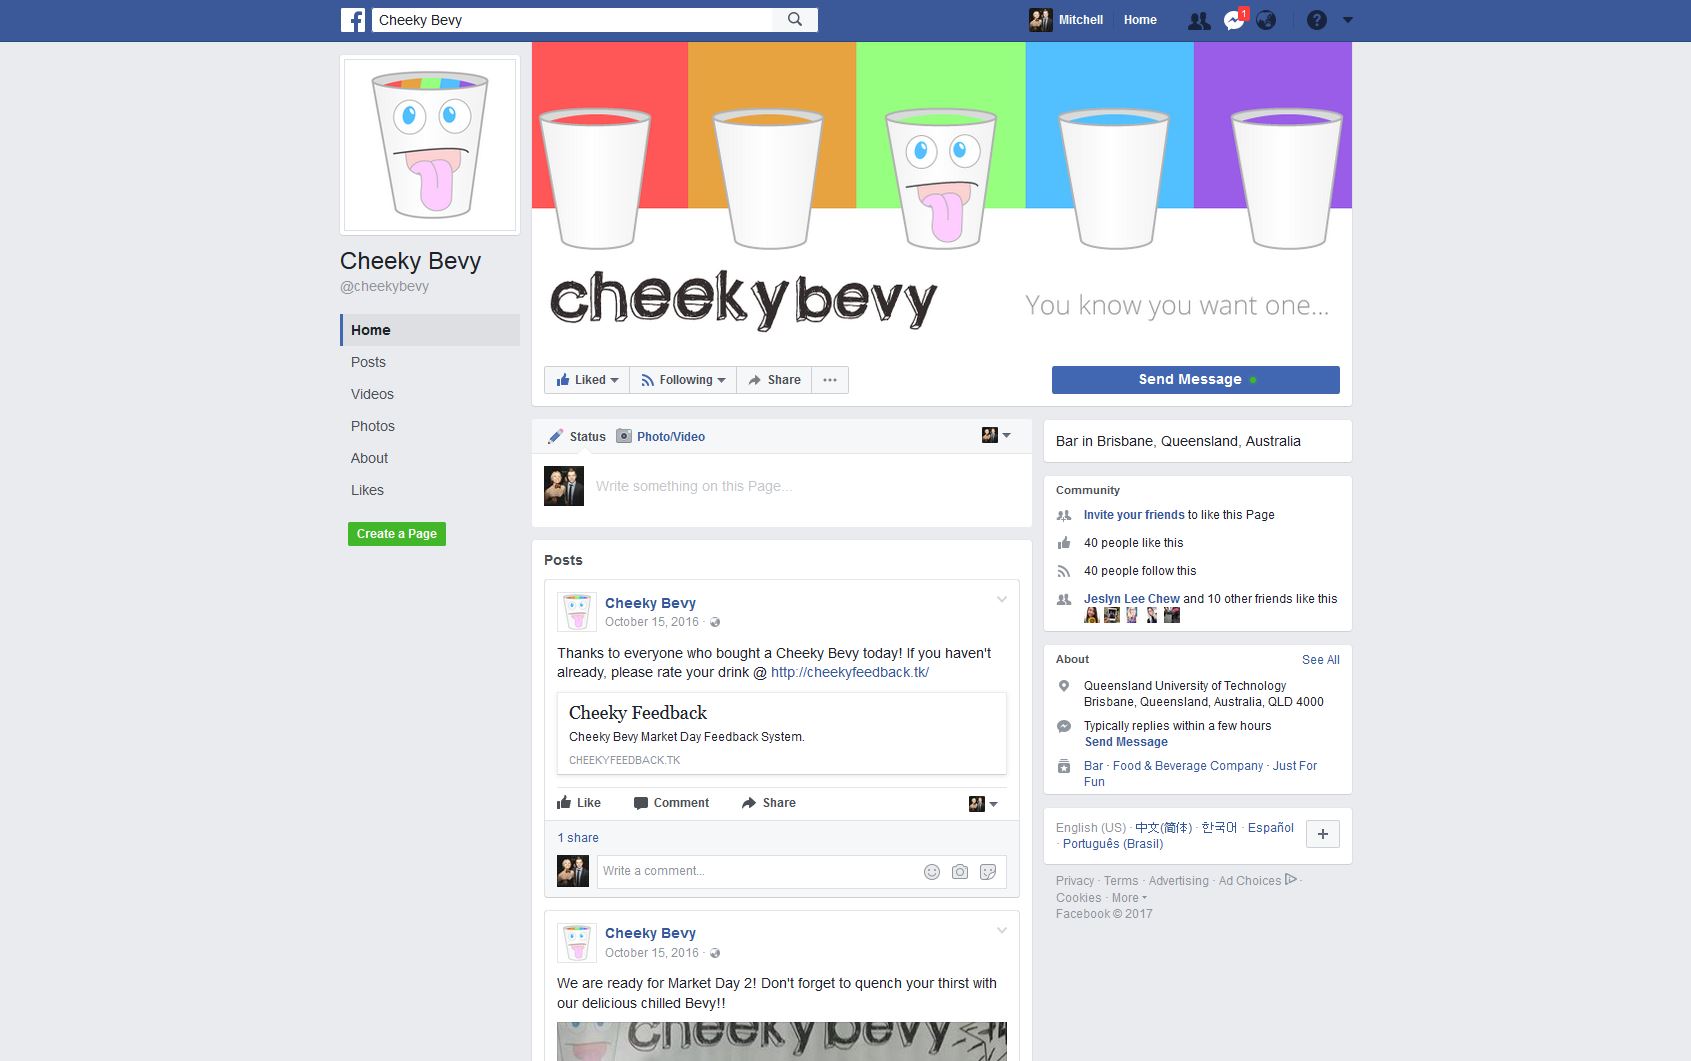 A screenshot of the Facebook page of Cheeky Bevy